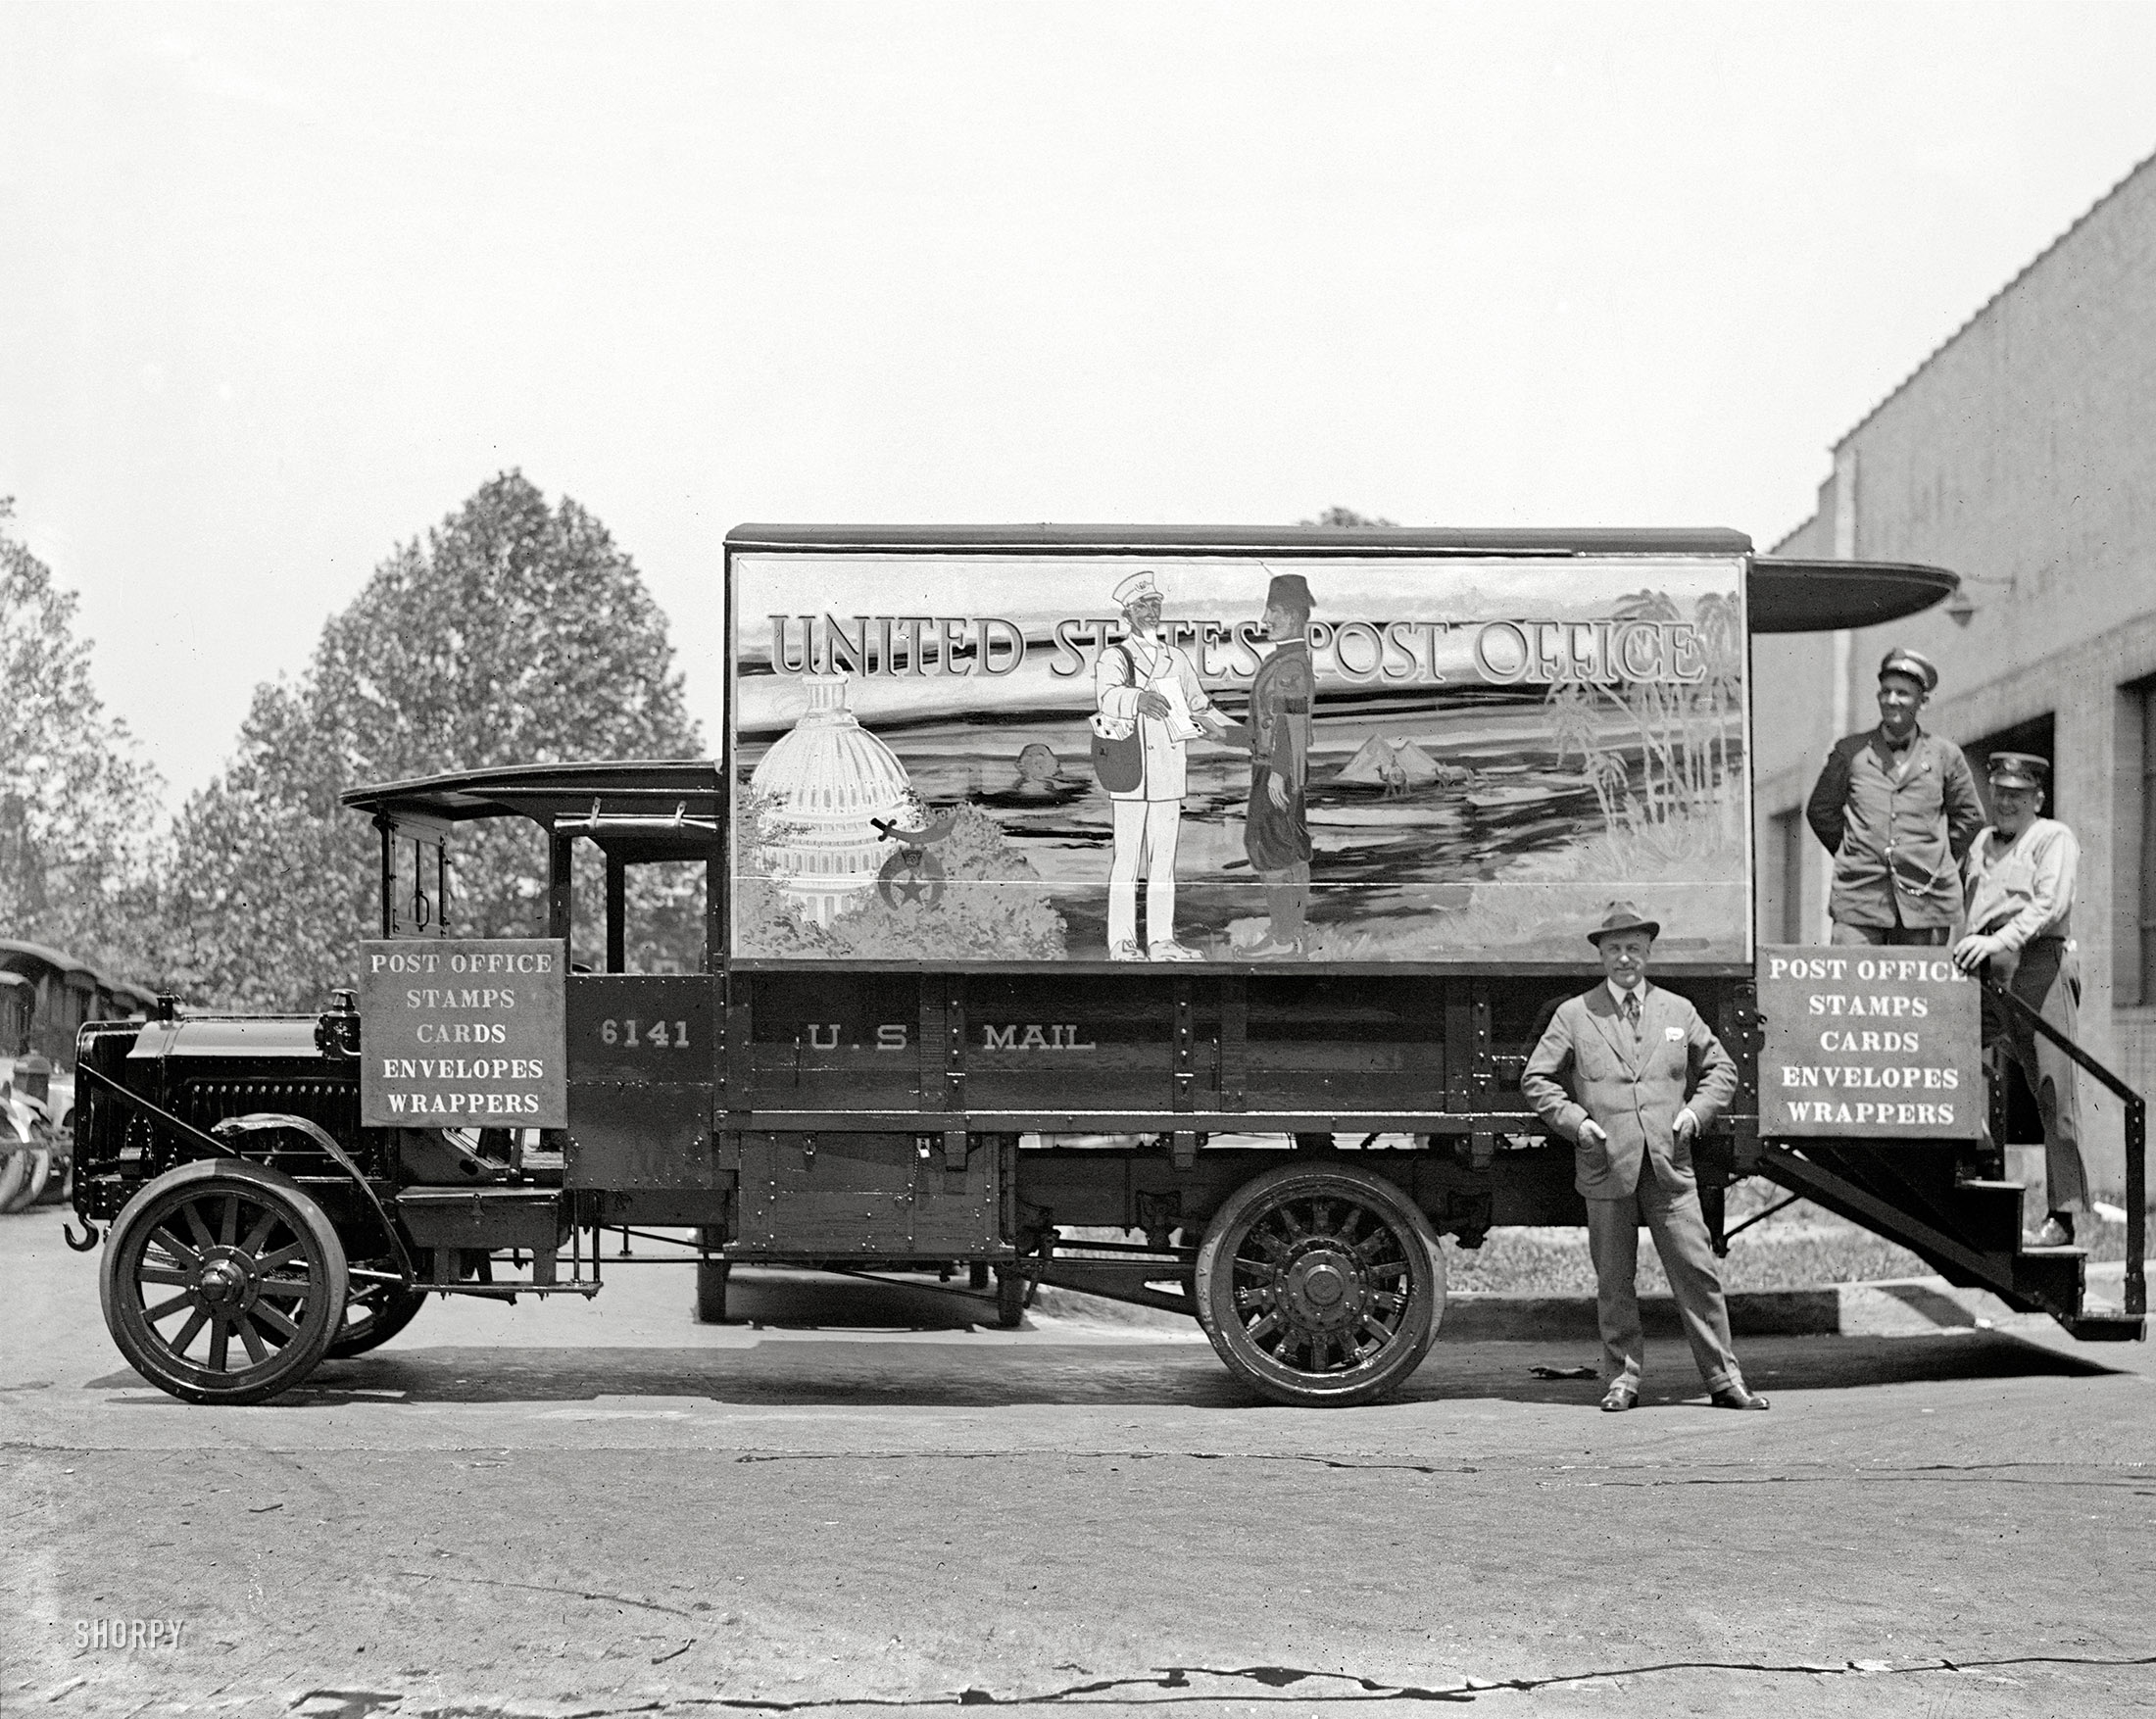 May 25, 1923. "Shrine post office." Set up for the big convention of Masonic orders held that year in Washington, D.C. The gent in front is Postmaster William M. Mooney. National Photo glass negative. View full size.